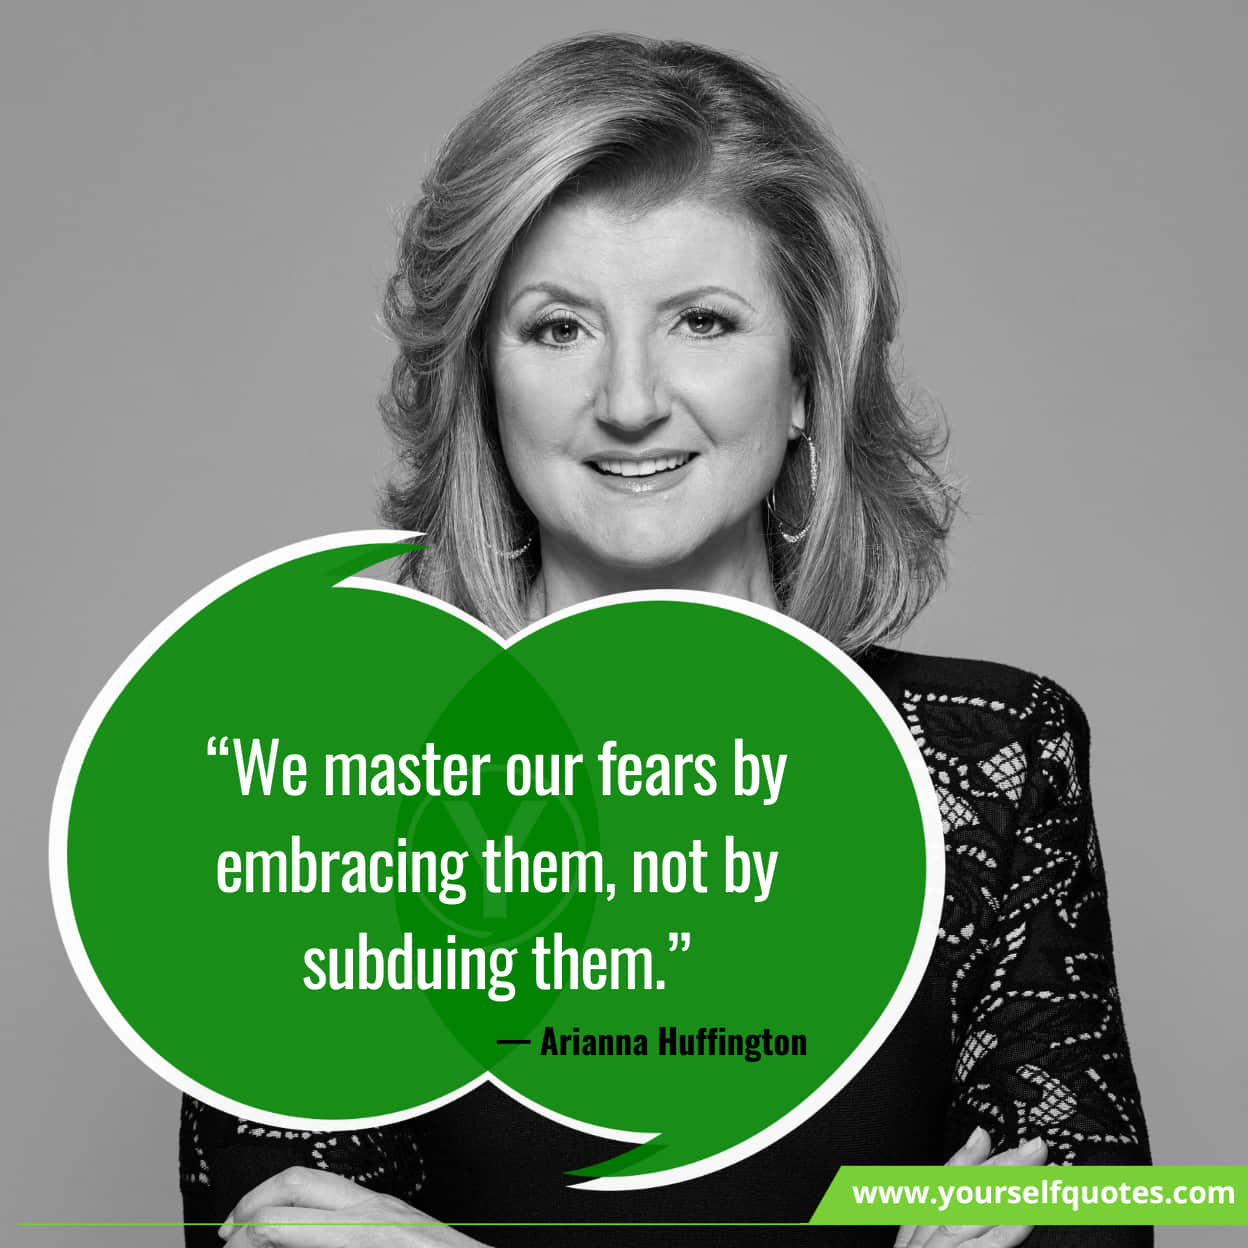 Arianna Huffington quotes on mindfulness and personal growth